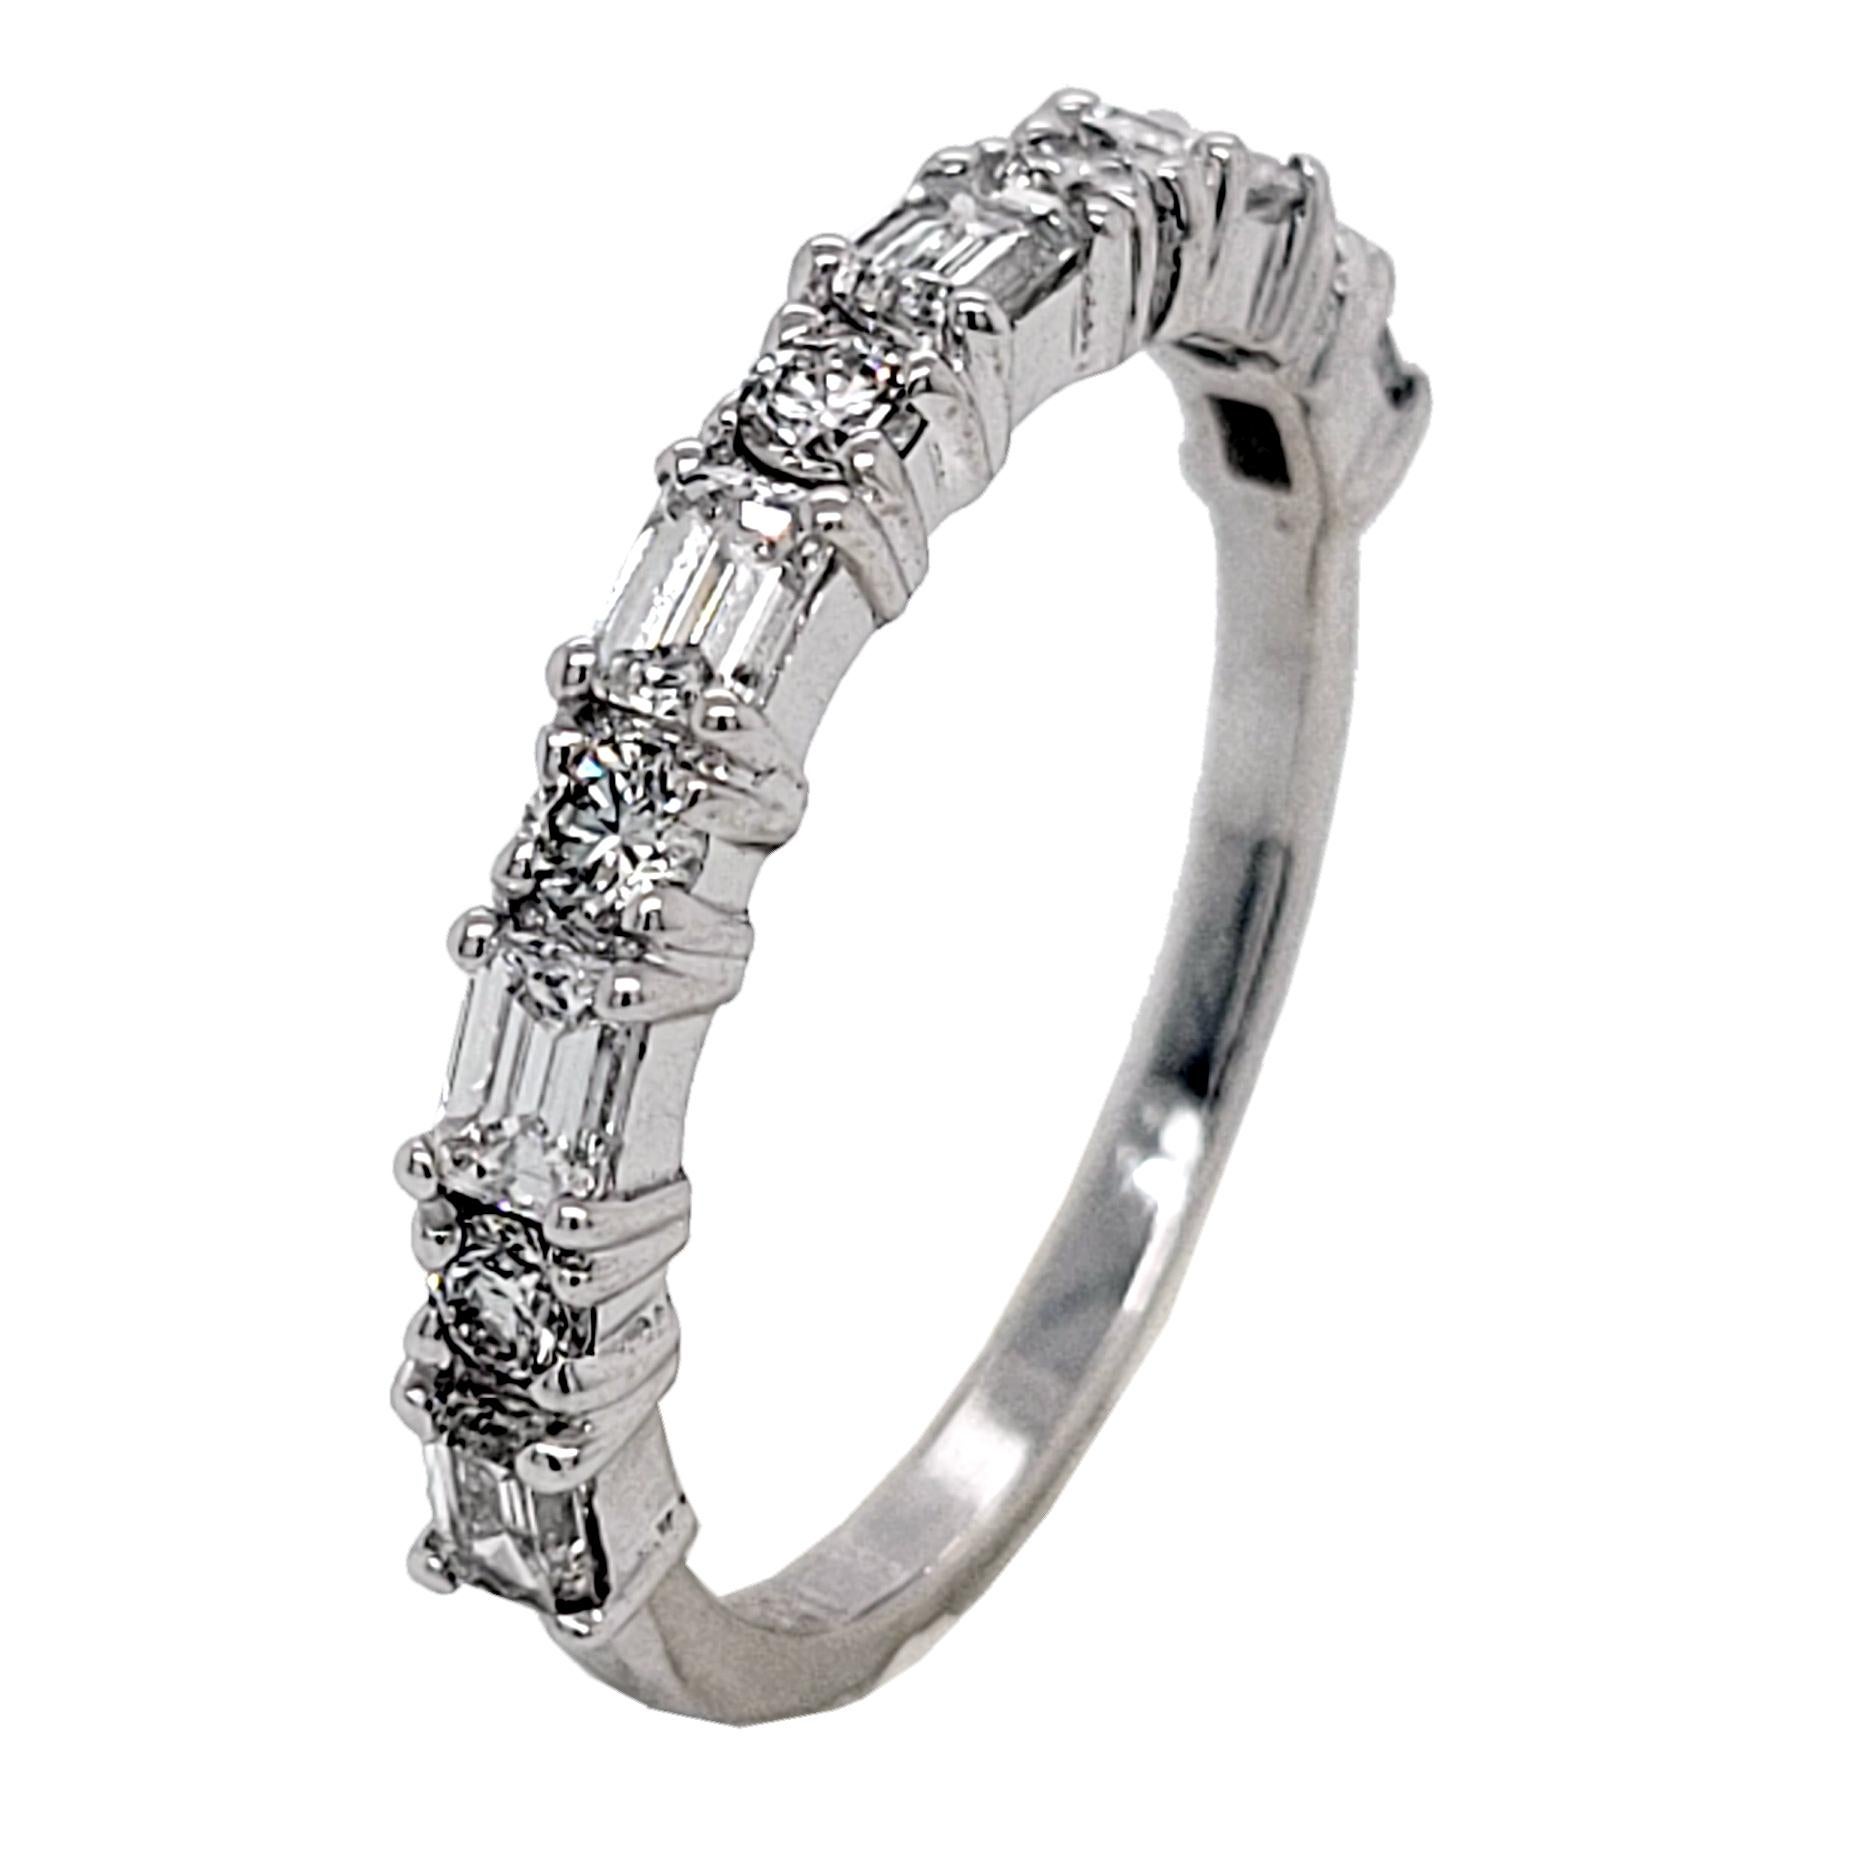 This beautiful Anniversary Ring is made in 18K White Gold showcasing 5 perfectly matched VS/E-F Emerald Cut and 6 Round Brilliant Diamonds Set in Shared Prong Mode.
Total Weight of diamonds: 0.83 Ct Clarity: VS, Color: E-F
Total Weight of the Ring: